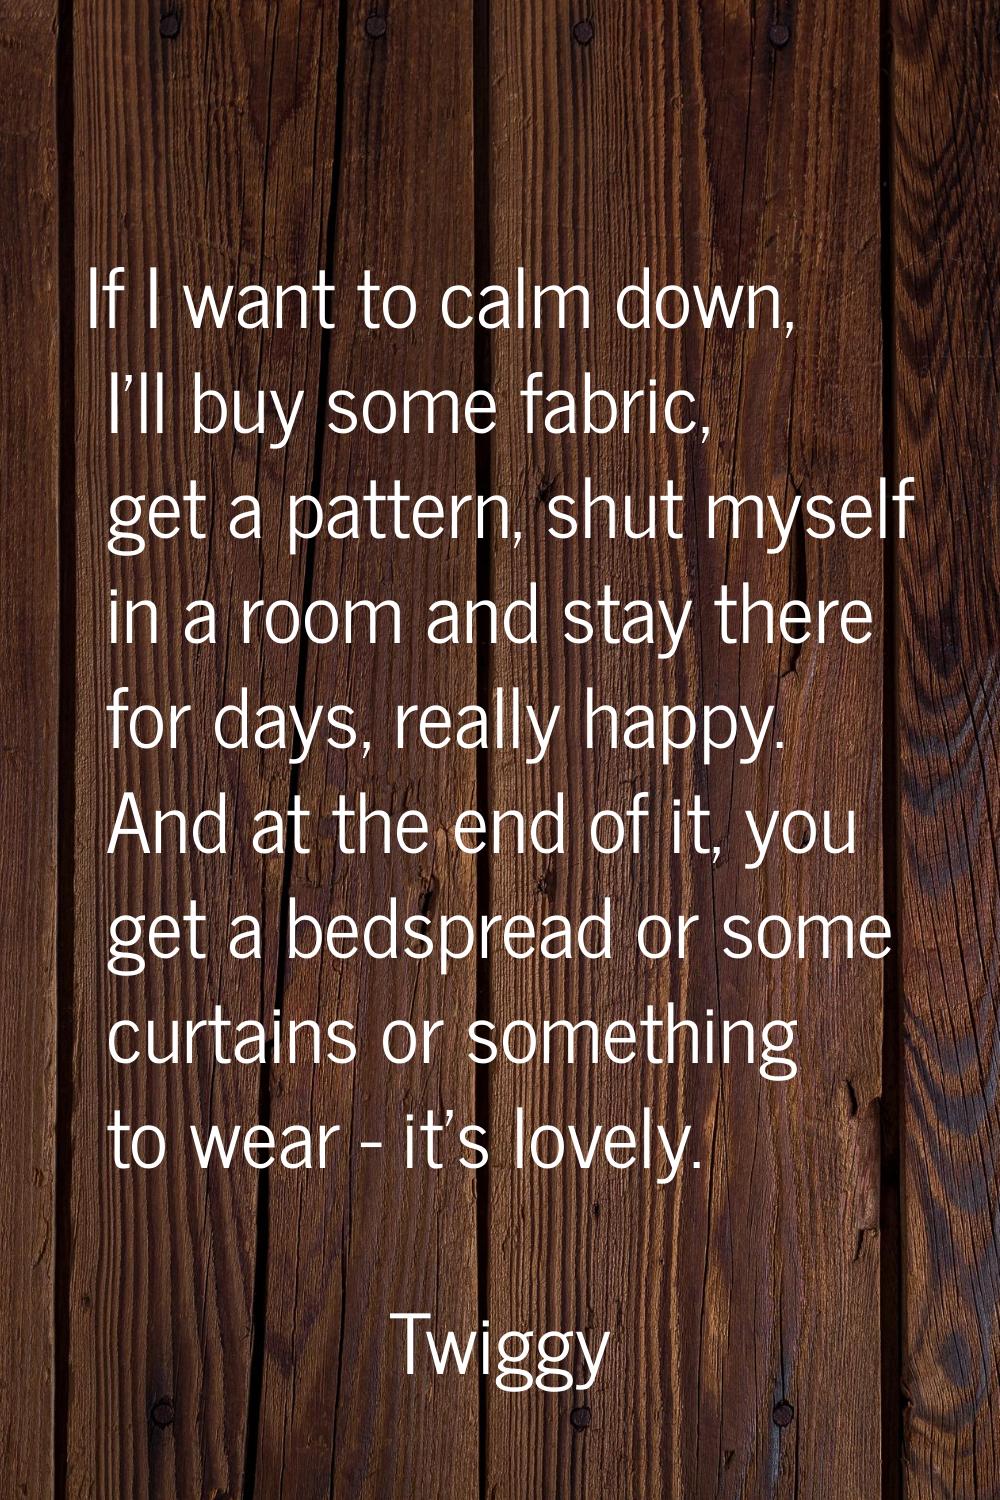 If I want to calm down, I'll buy some fabric, get a pattern, shut myself in a room and stay there f